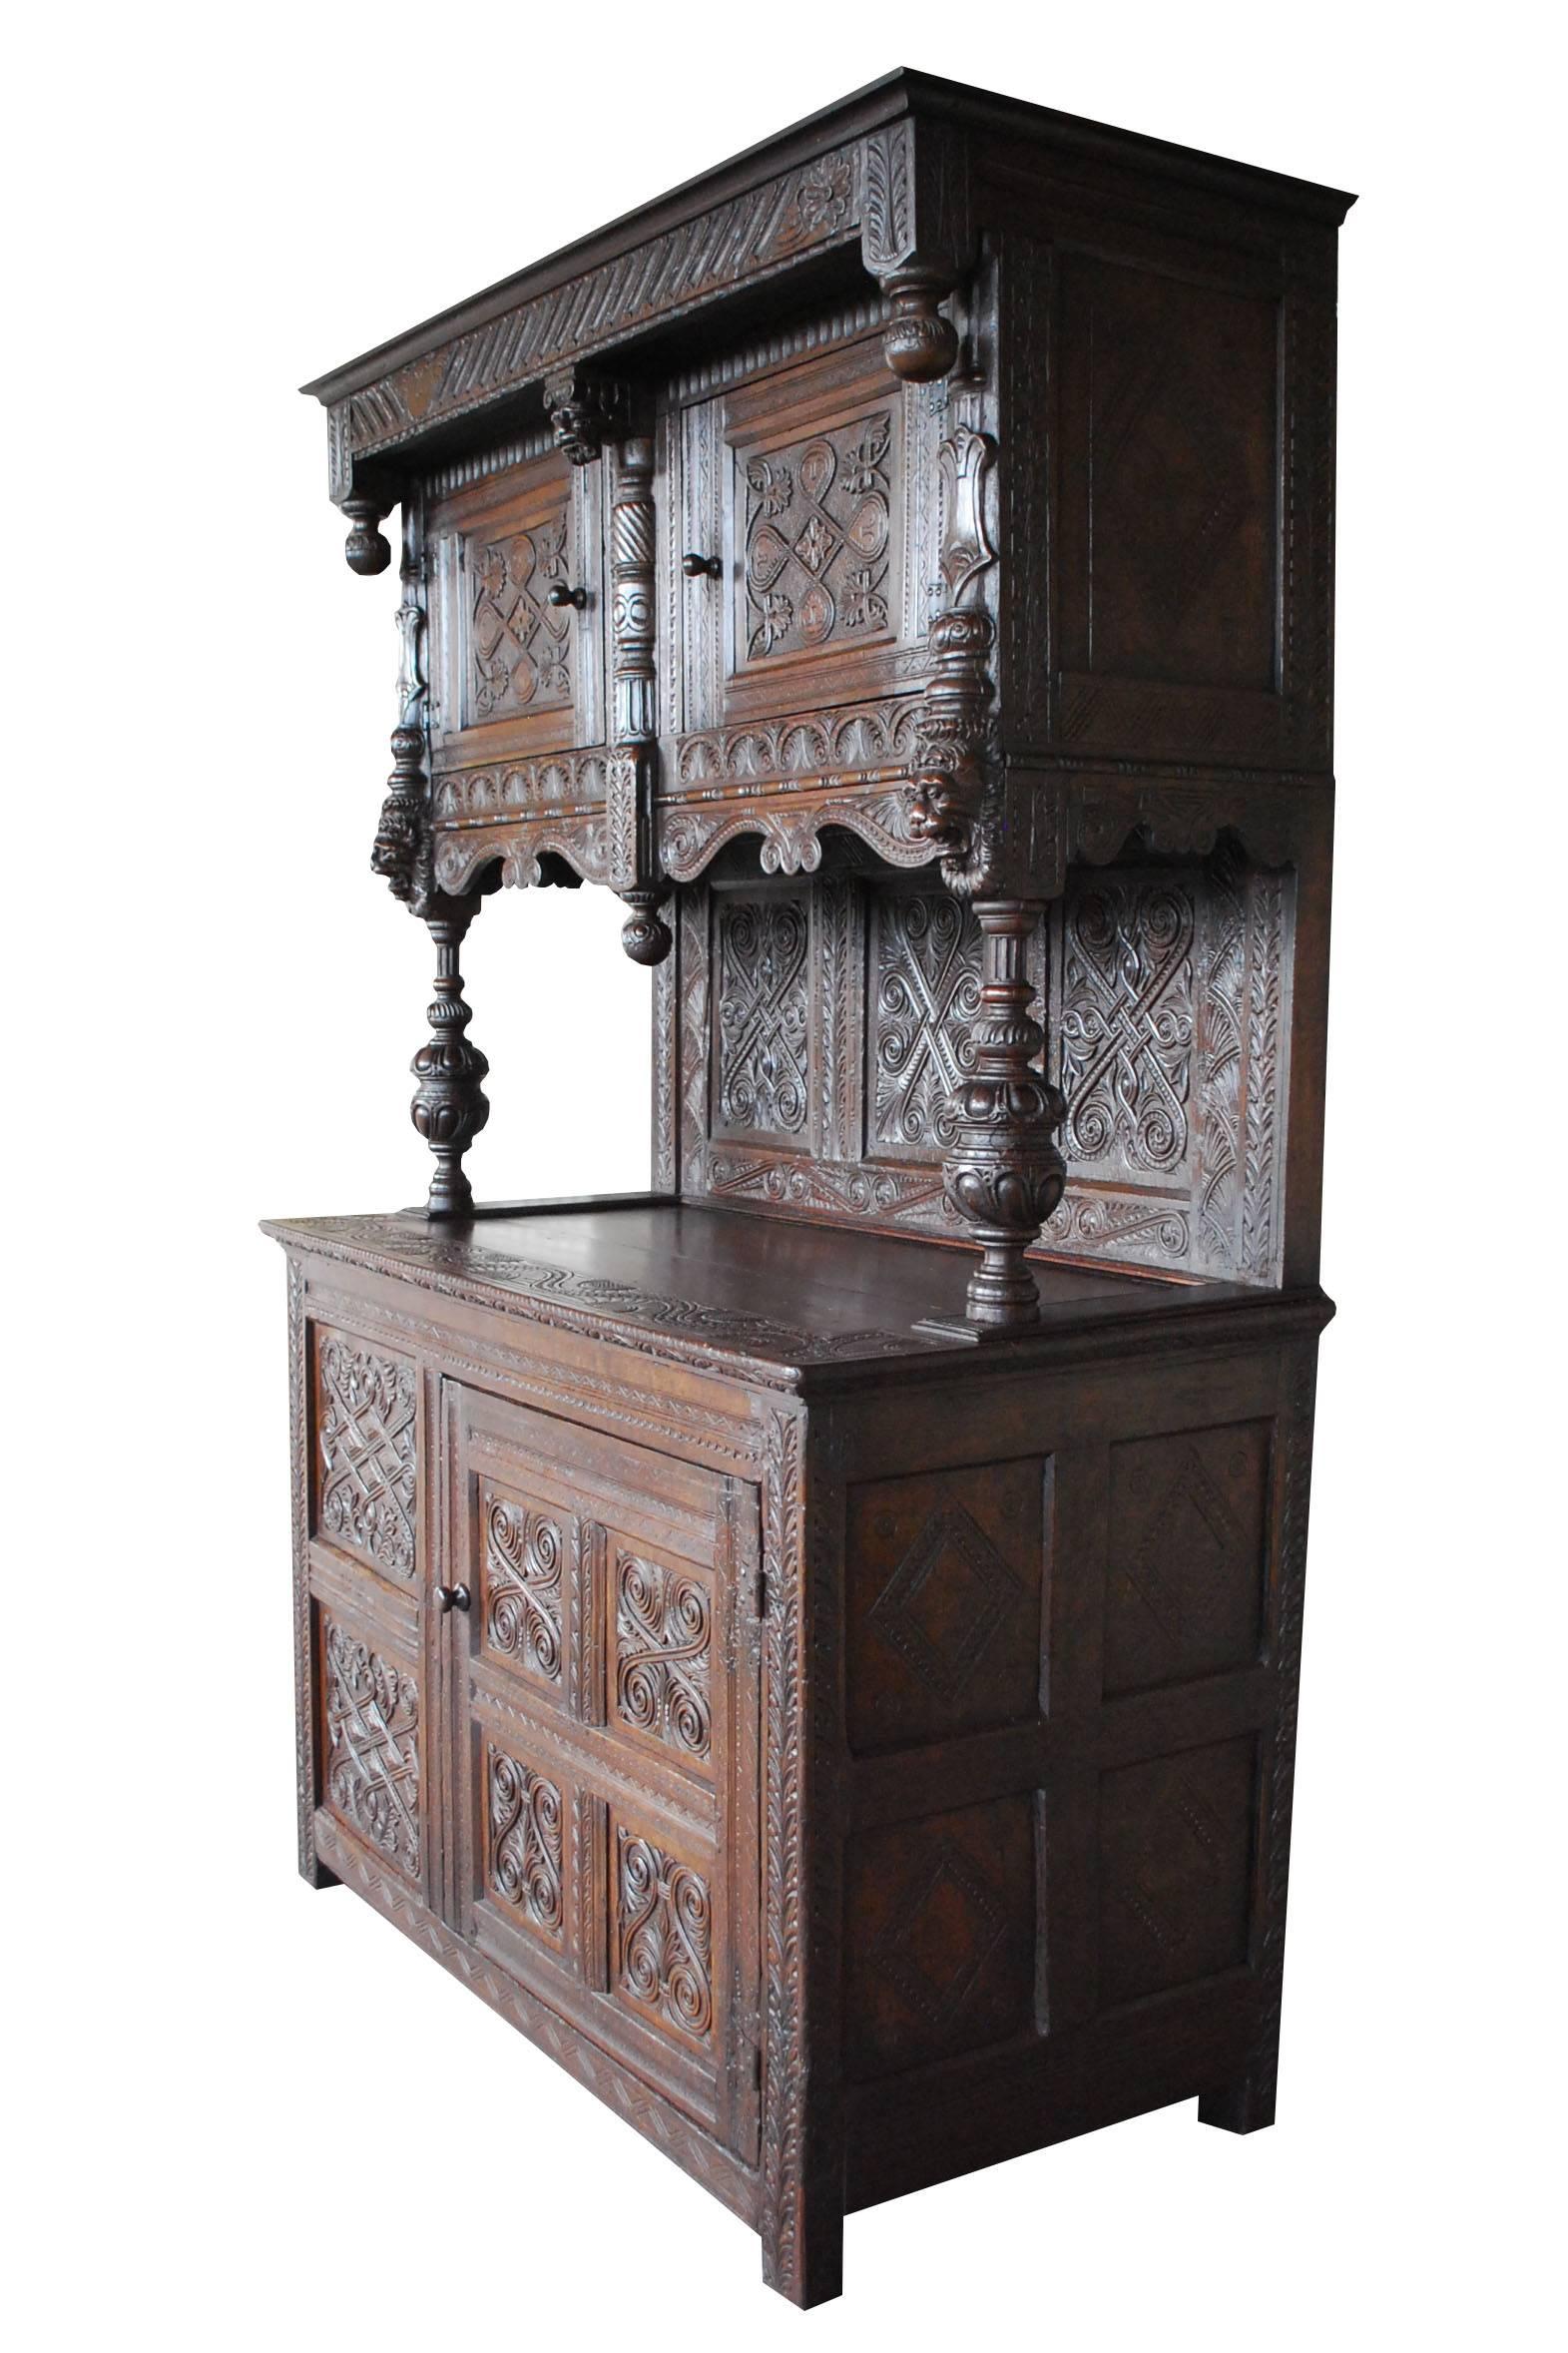 Early 19th century English carved oakwood Tudor cabinet existing of two pieces.
Originates England, dating circa 1820.